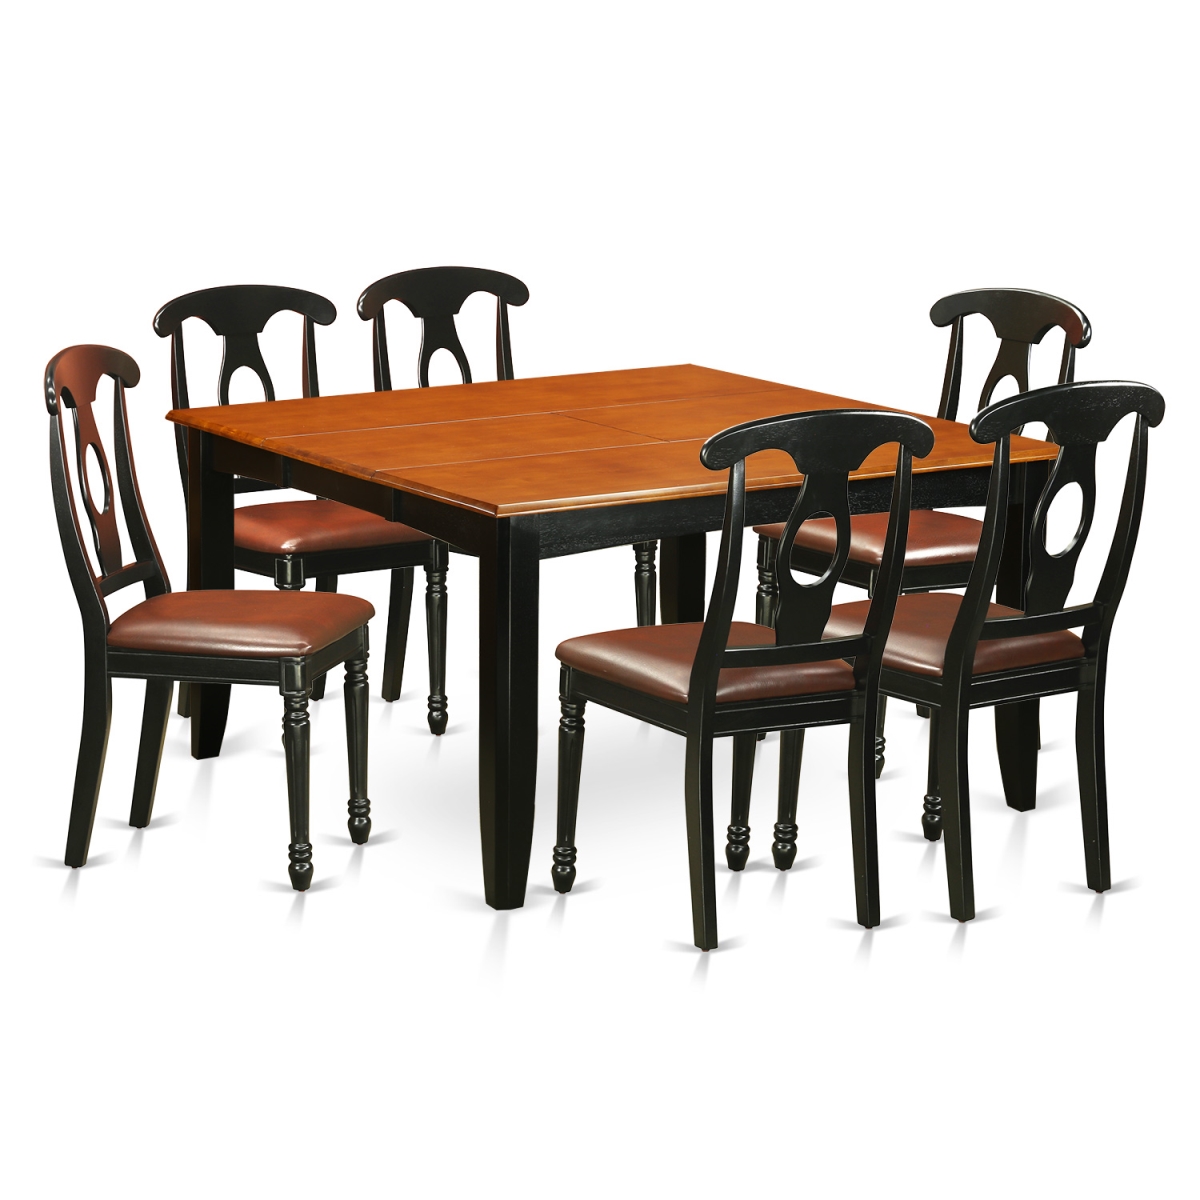 PFKE7-BCH-LC Dining Room Table Set - Table & 4 Solid Wood Chairs, Black & Cherry - 7 Piece -  East West Furniture